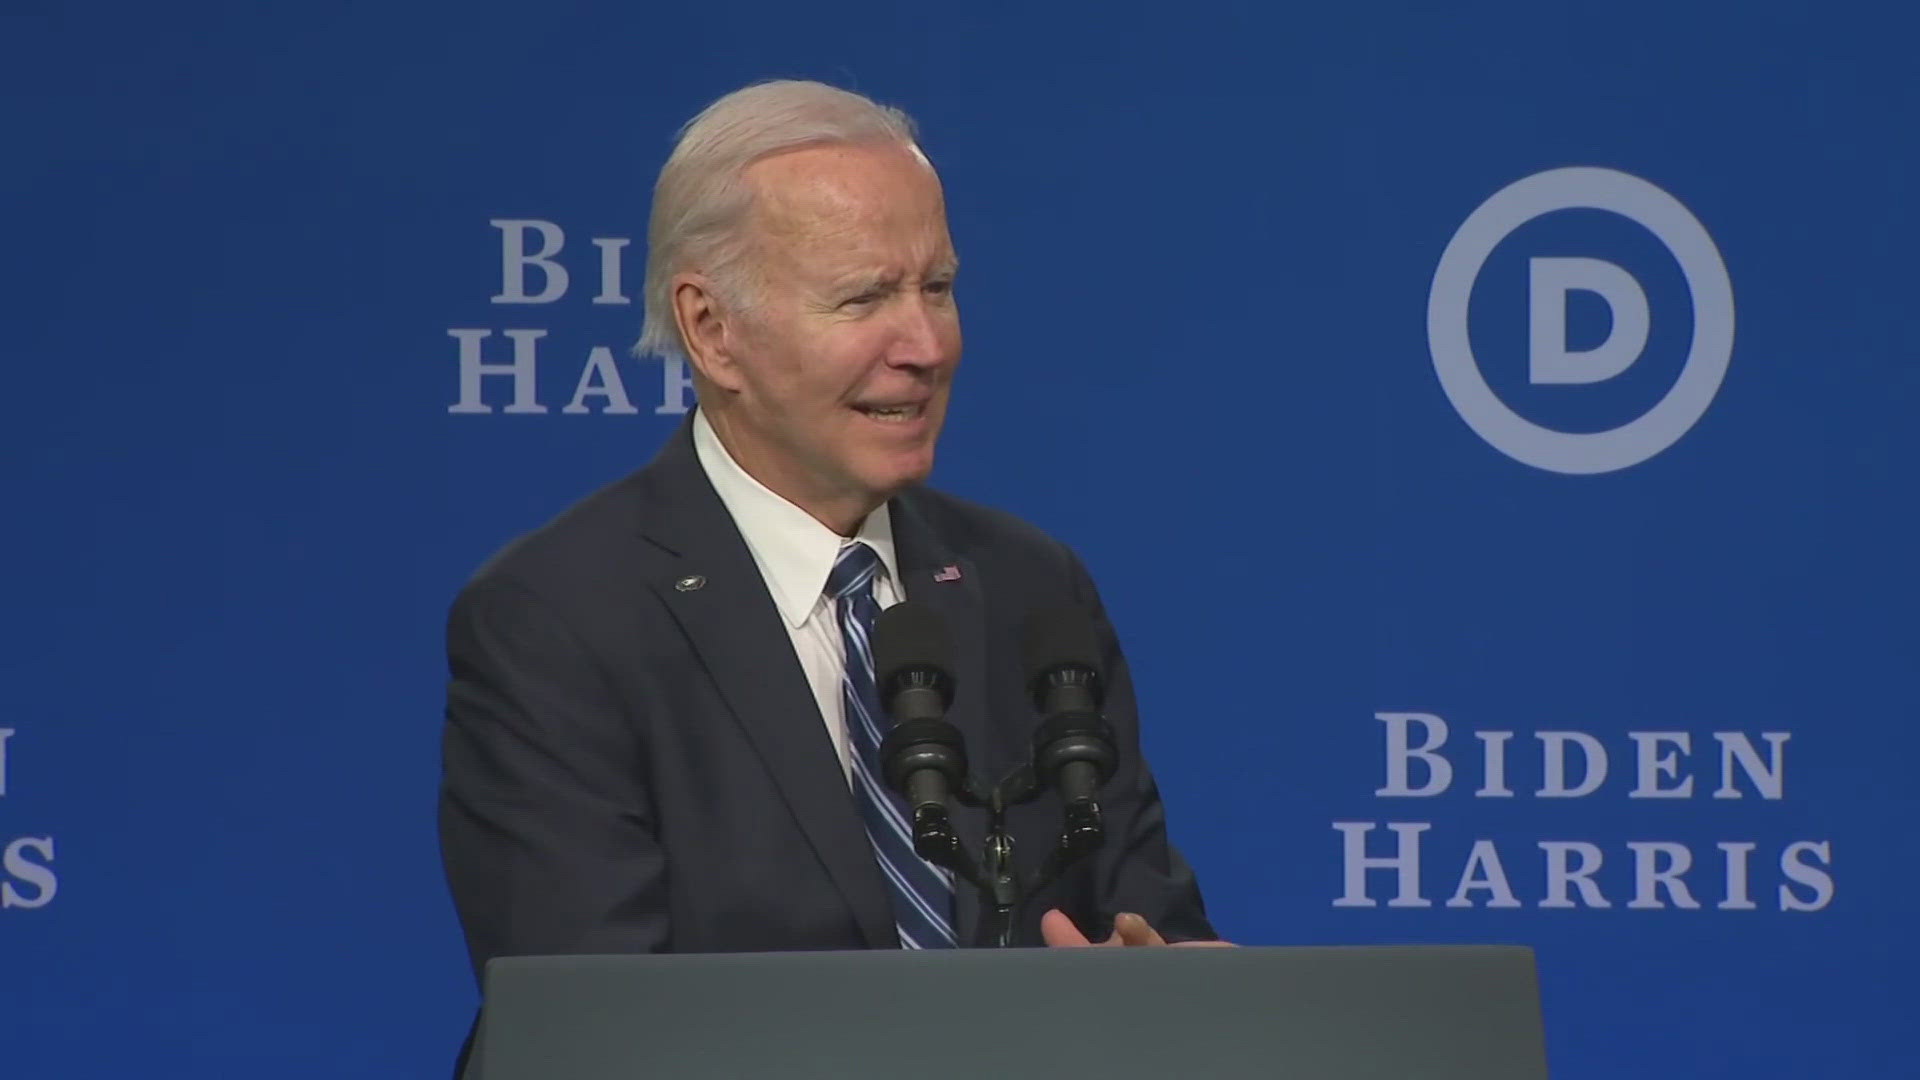 The Democratic National Committee announced that it would solve Biden’s problem with Ohio’s ballot deadline by holding a virtual roll call vote to nominate him.